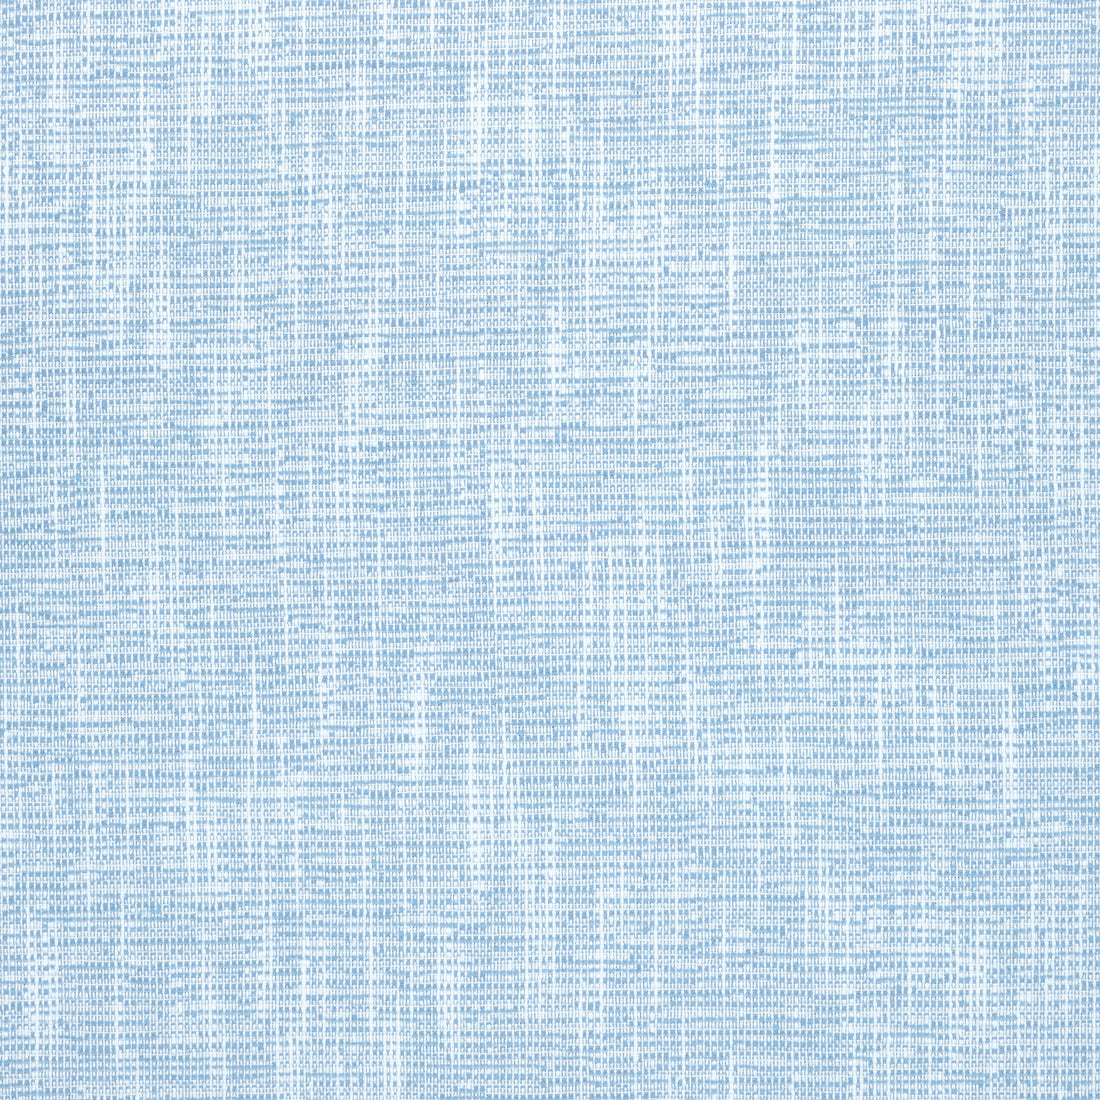 Piper fabric in sky color - pattern number W73444 - by Thibaut in the Landmark Textures collection